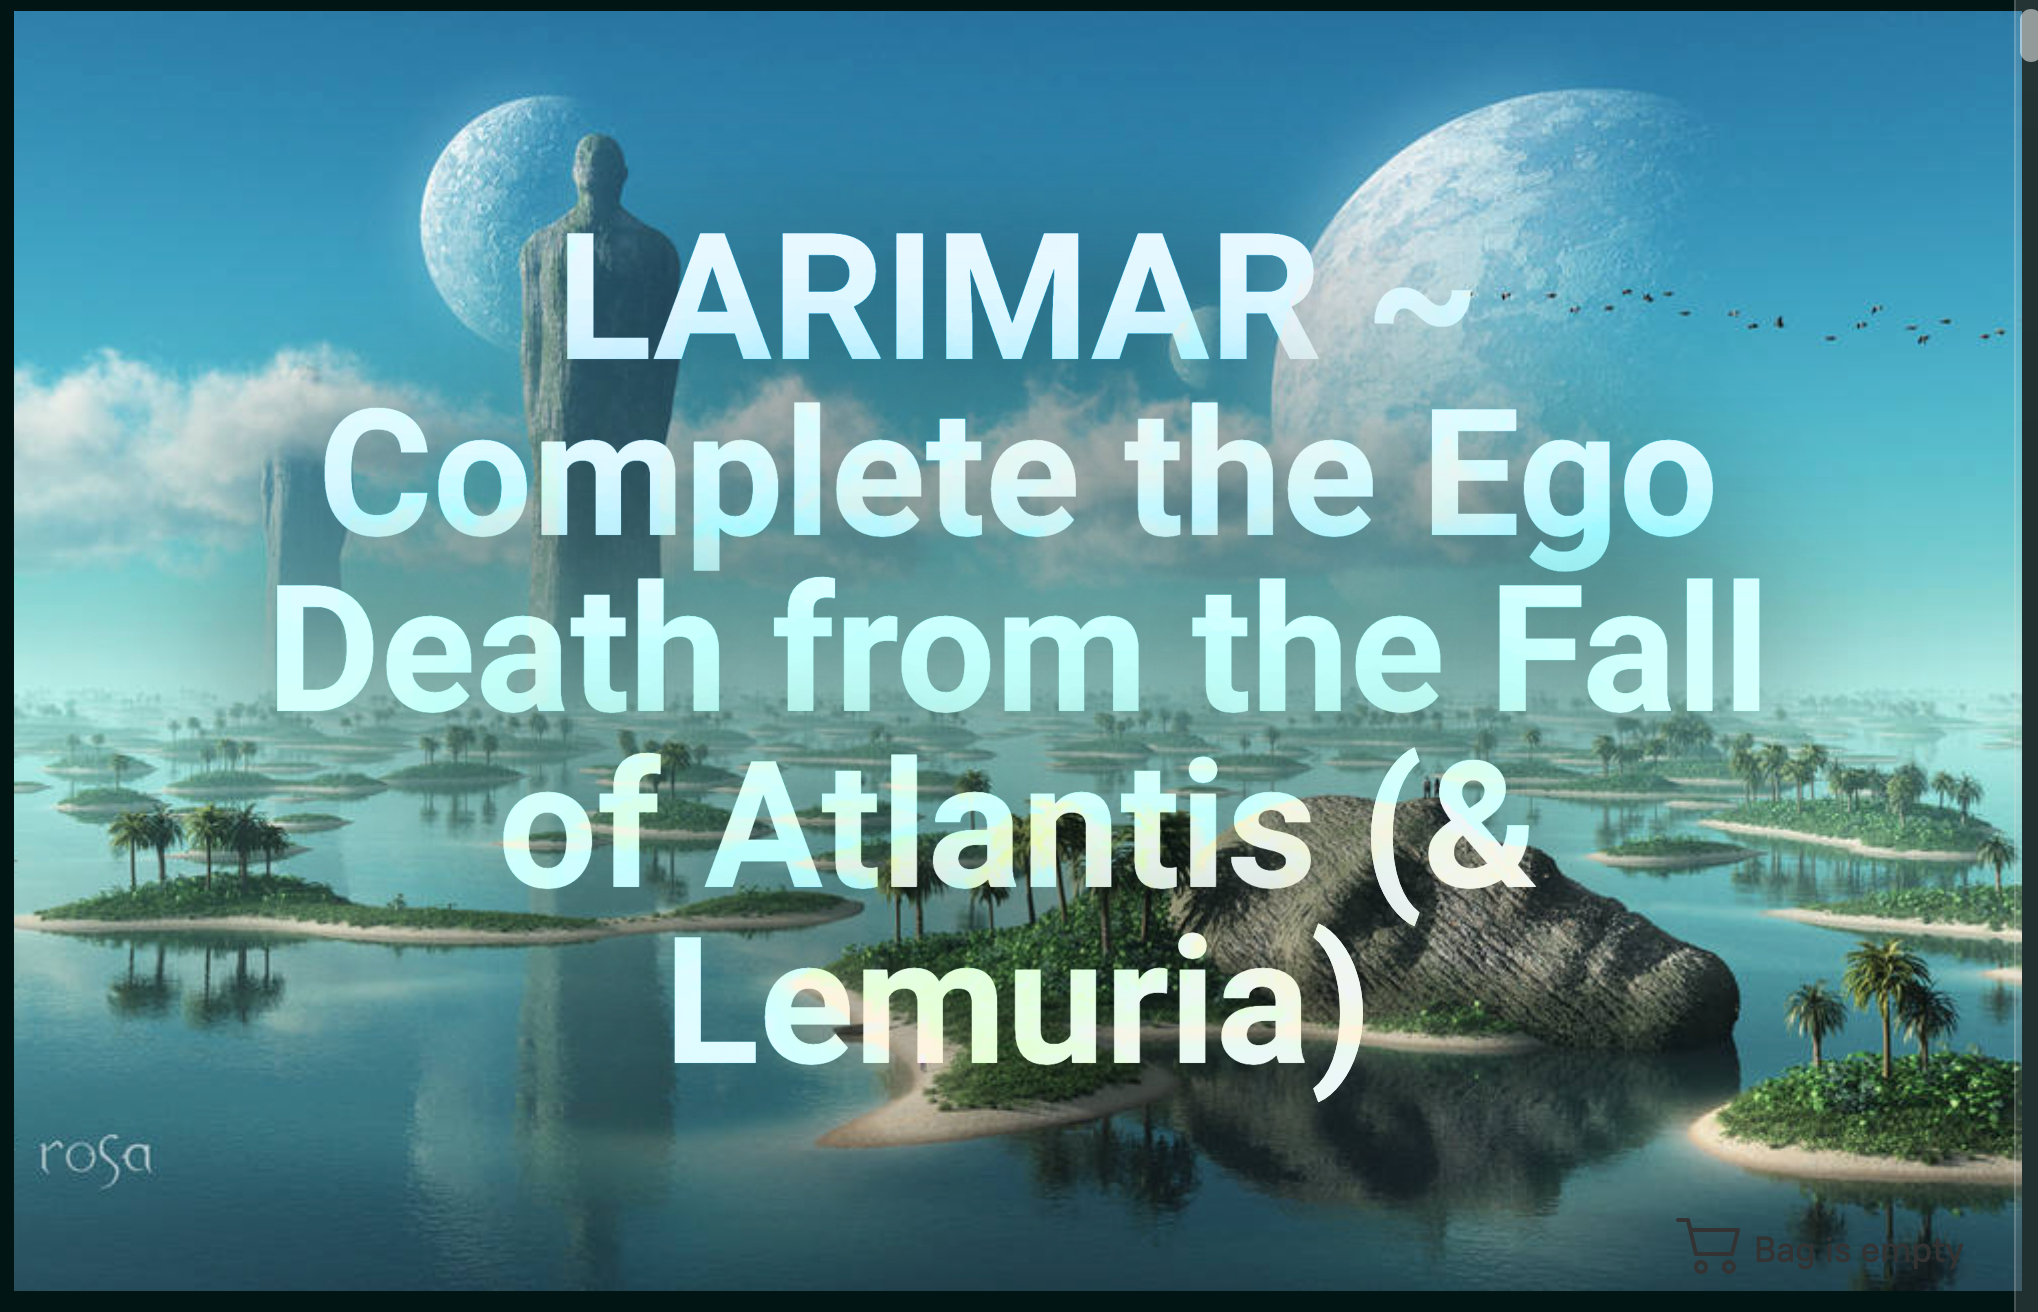 LARIMAR ~ Complete the Ego Death from the Fall of Atlantis (& Lemuria)